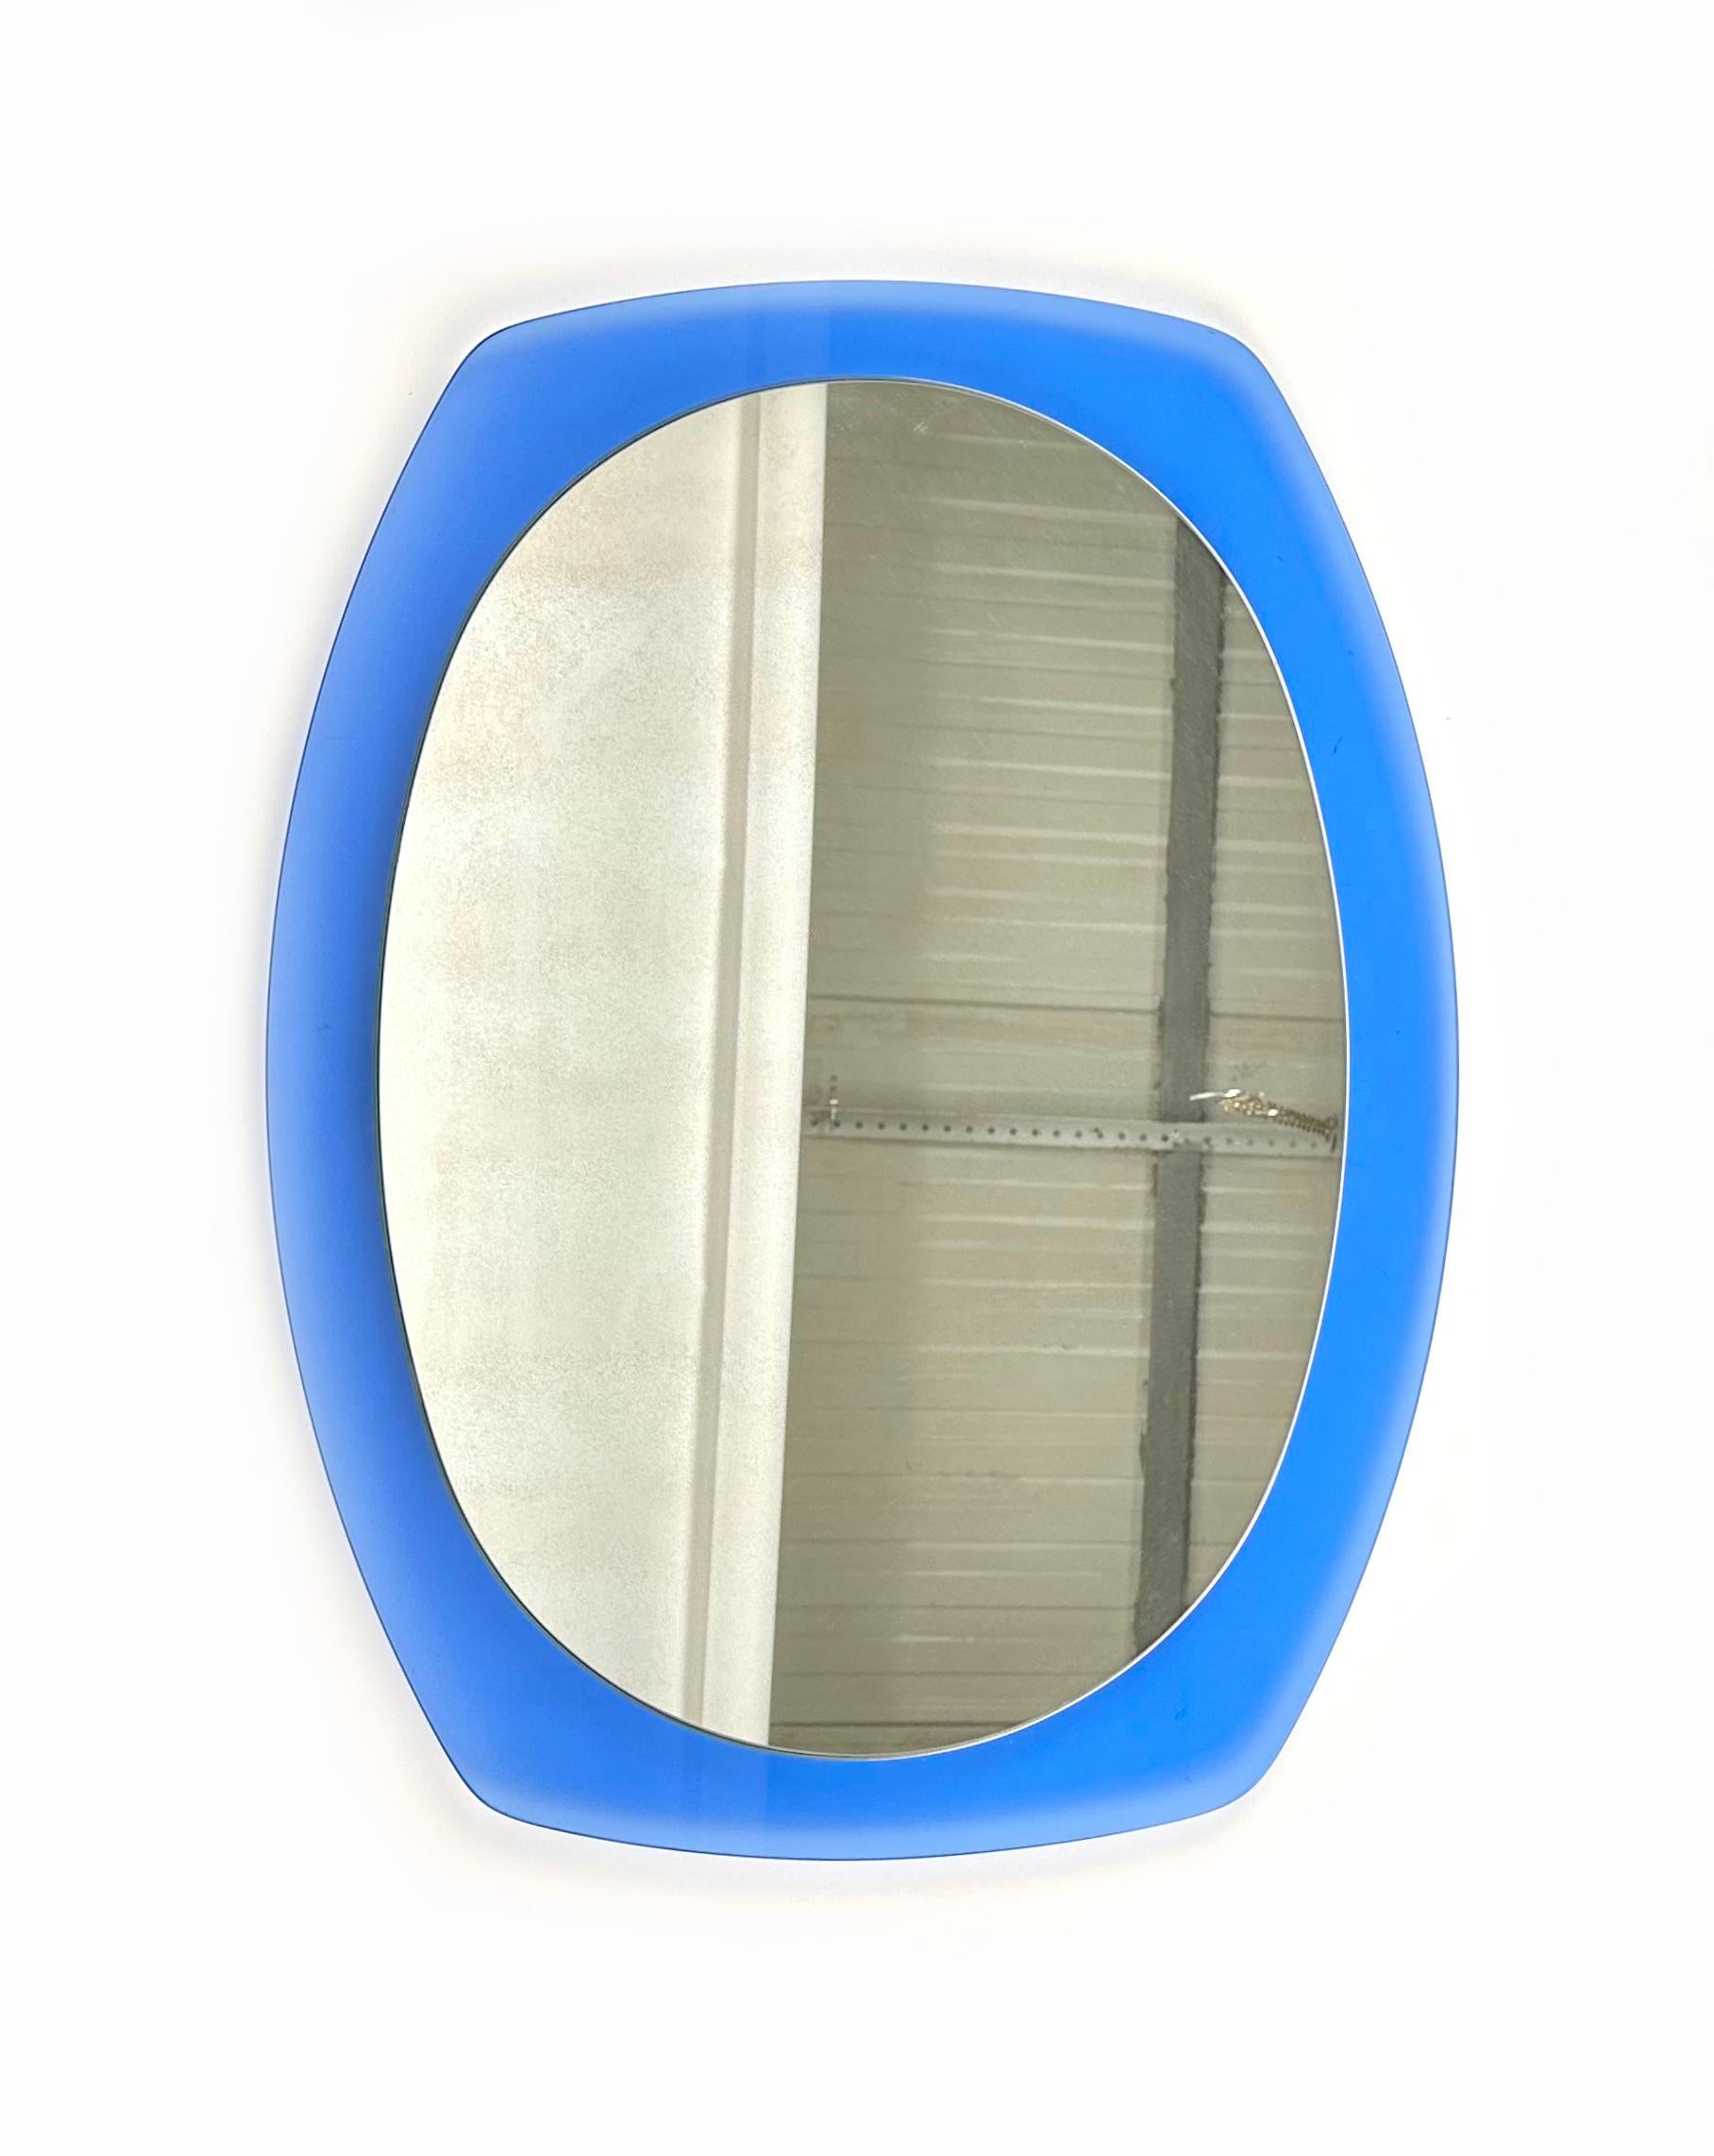 Mid-Century Modern Midcentury Wall Mirror Blue Glass by Veca, Italy, 1970s For Sale